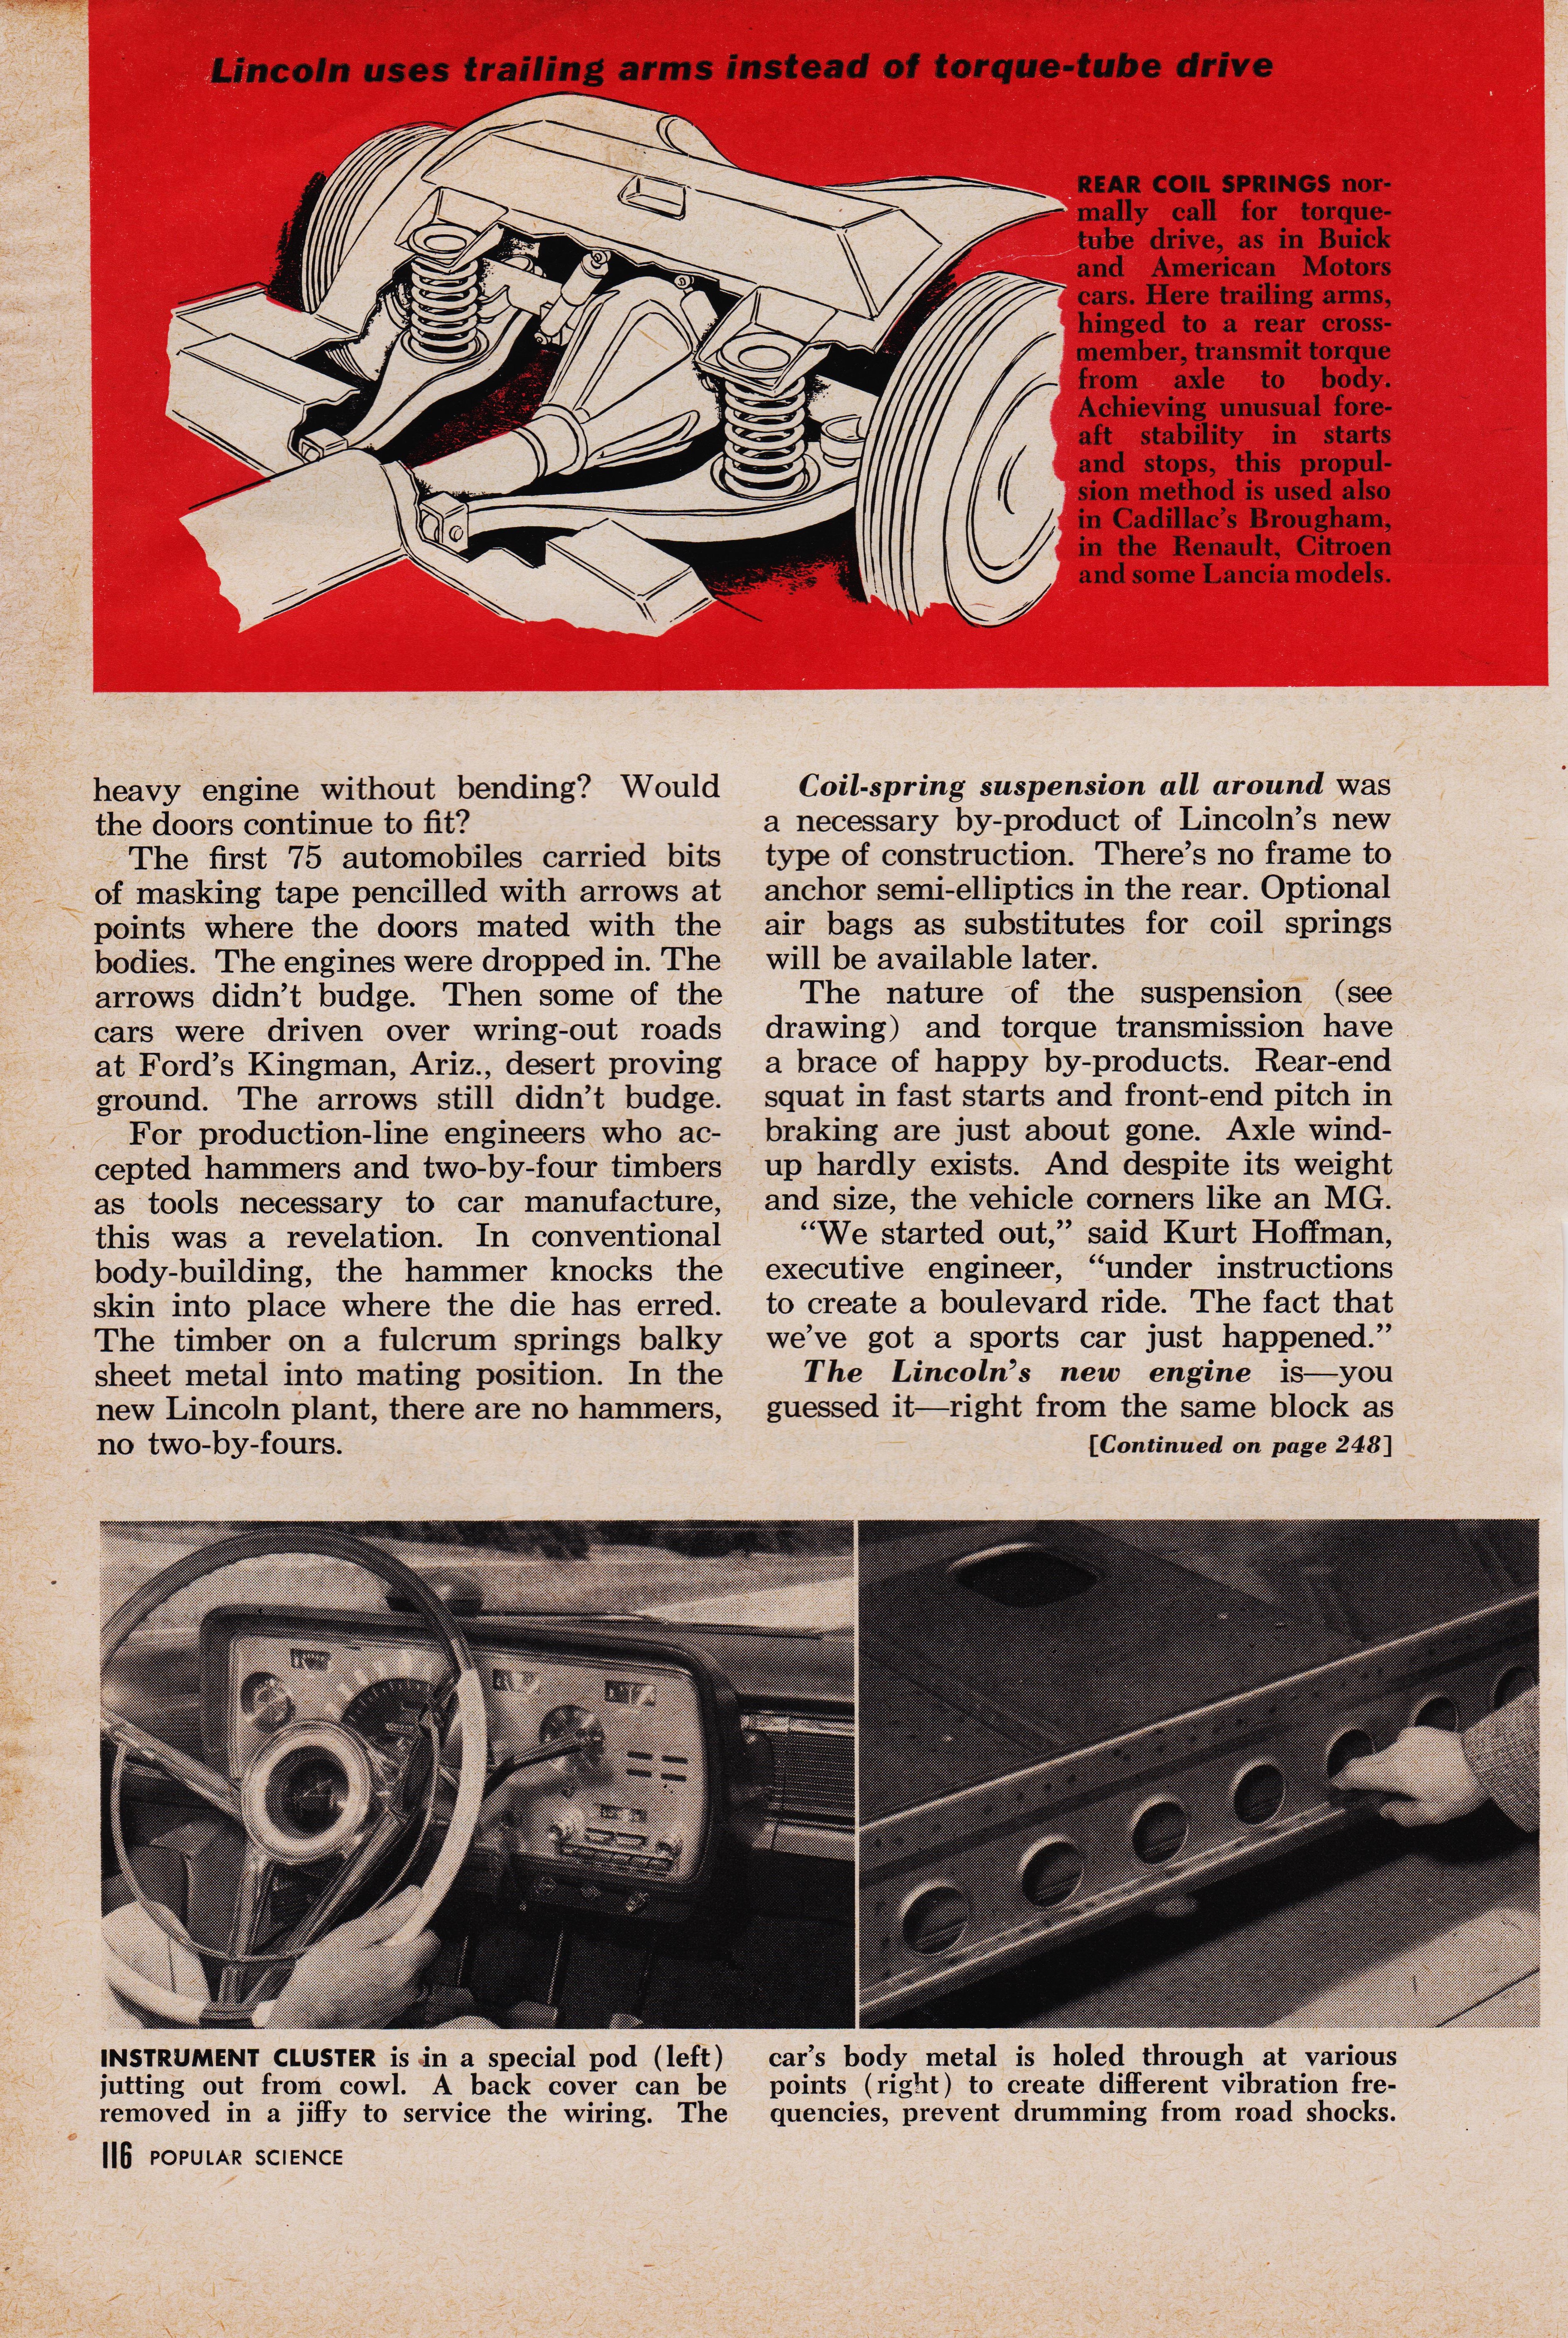 https://www.antiquemachinery.com/images-Popular-Science/Scientific-American-1958-Cars-pg-114-Lincoln-Worlds-Longest-Car-engine-cradle.jpeg